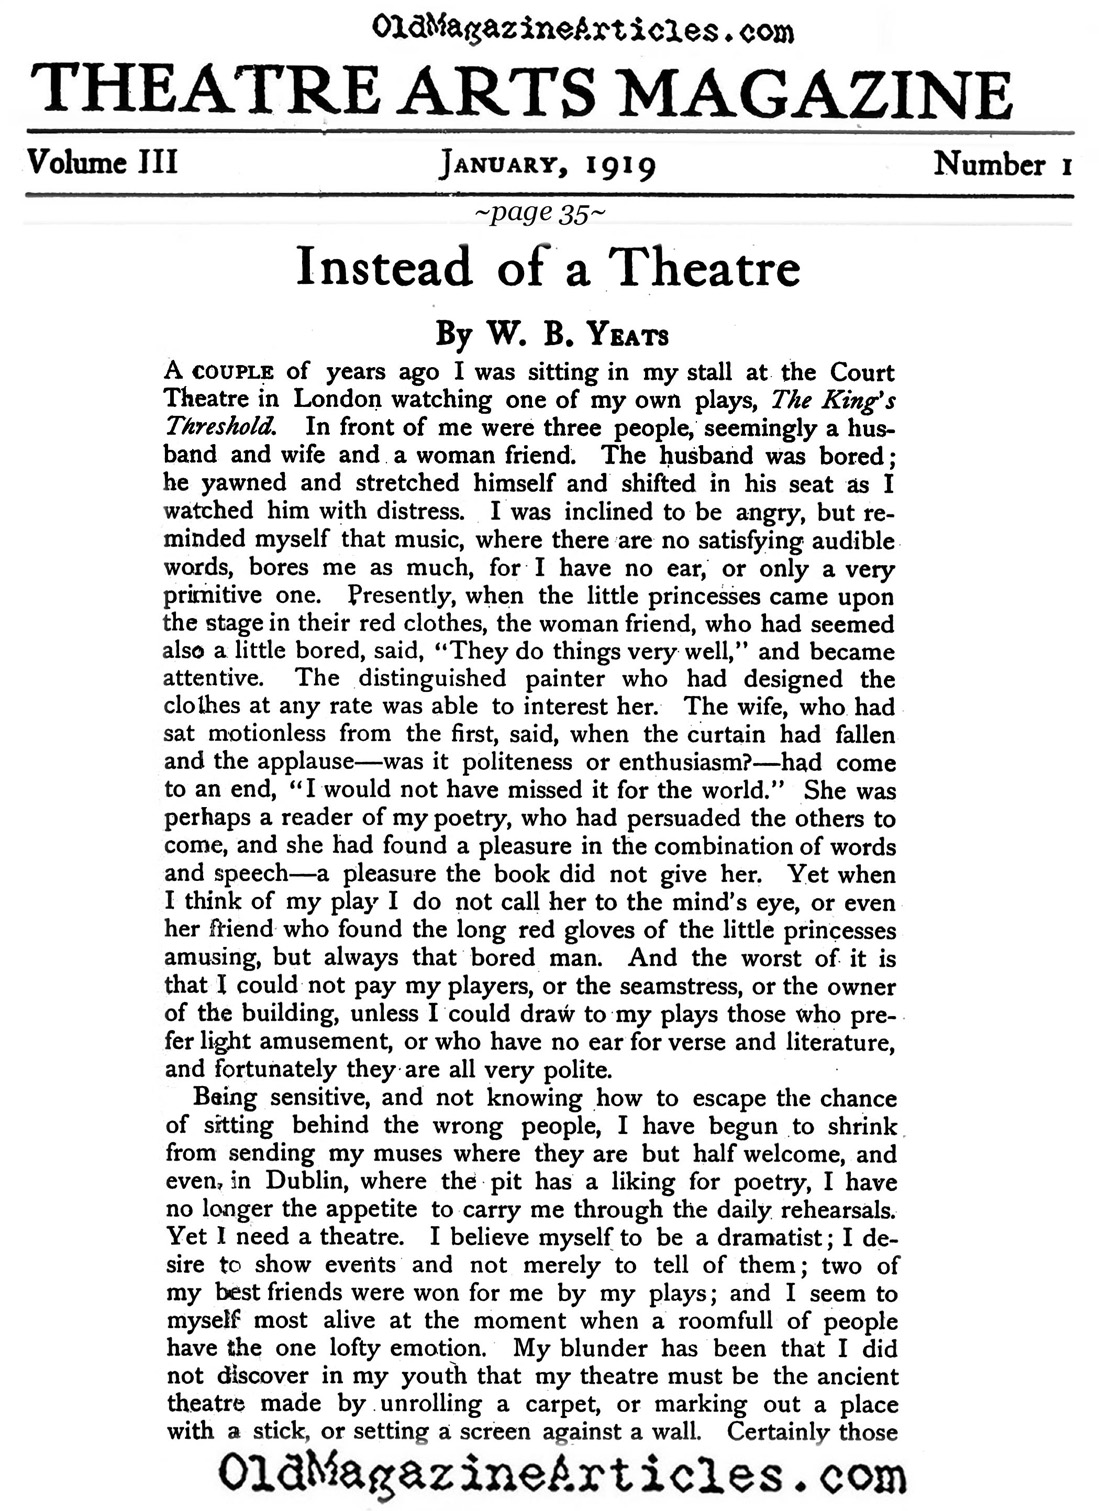 W.B. Yeats  Gripes About the Theater-Going Bourgeoisie <BR>(Theatre Arts Magazine, 1919)